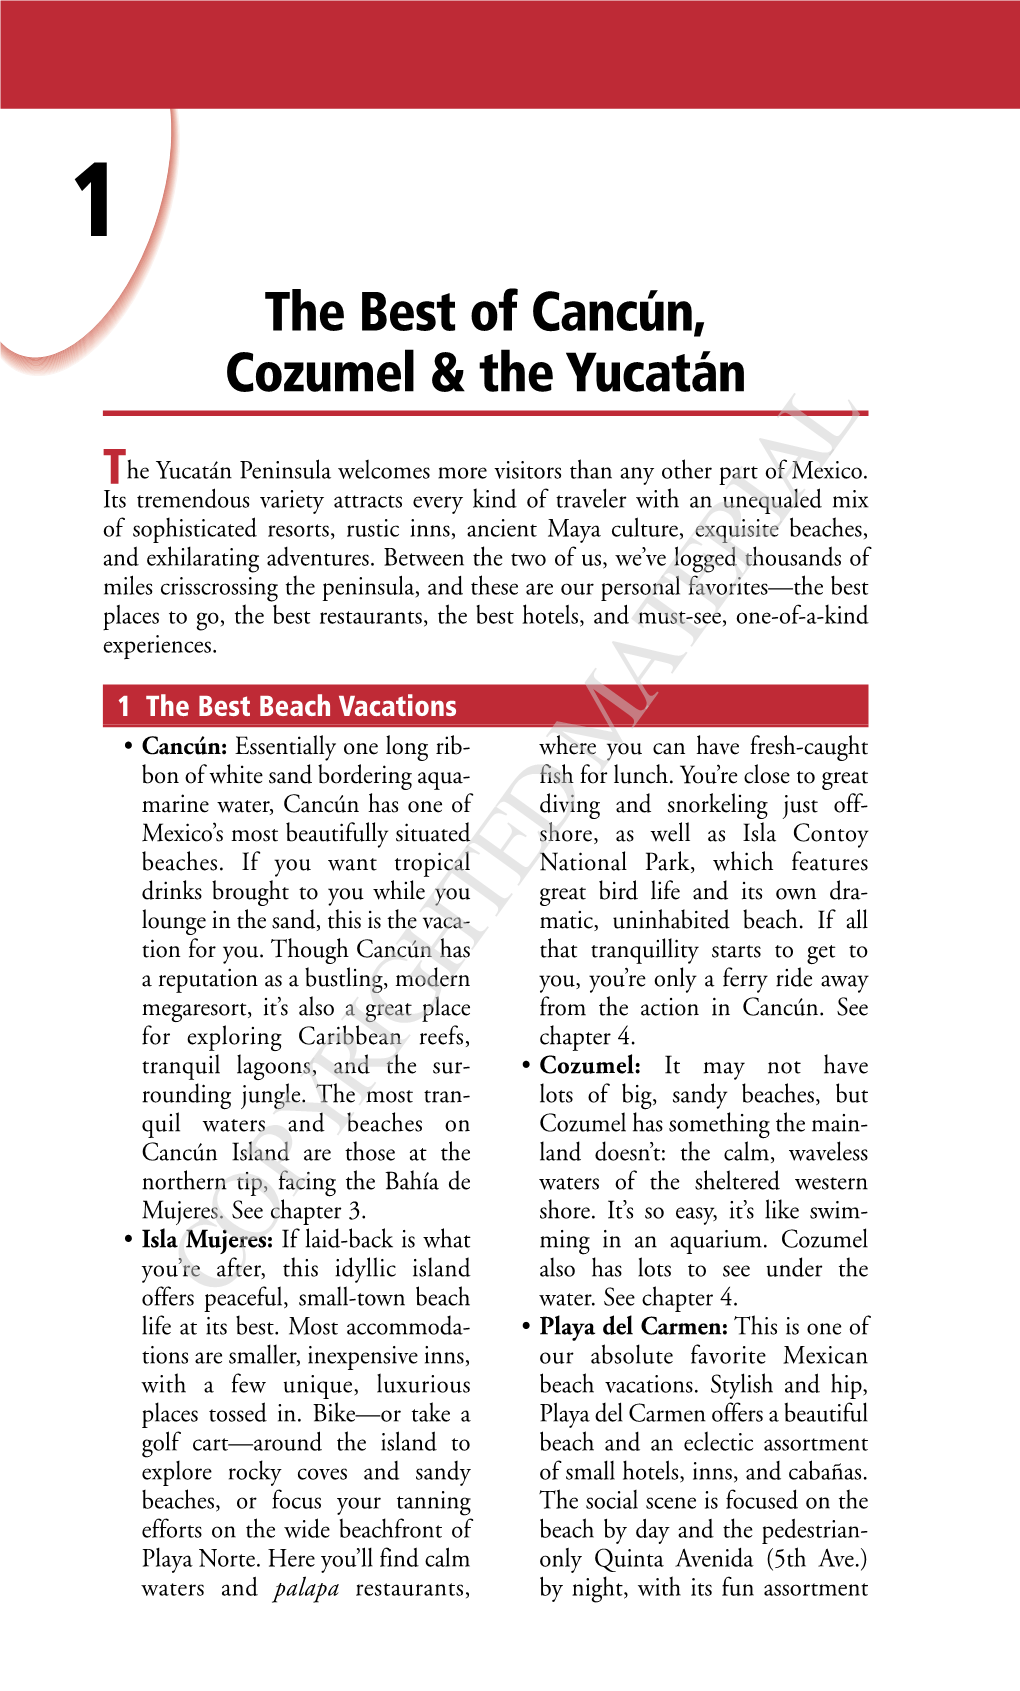 The Best of Cancún, Cozumel & the Yucatán